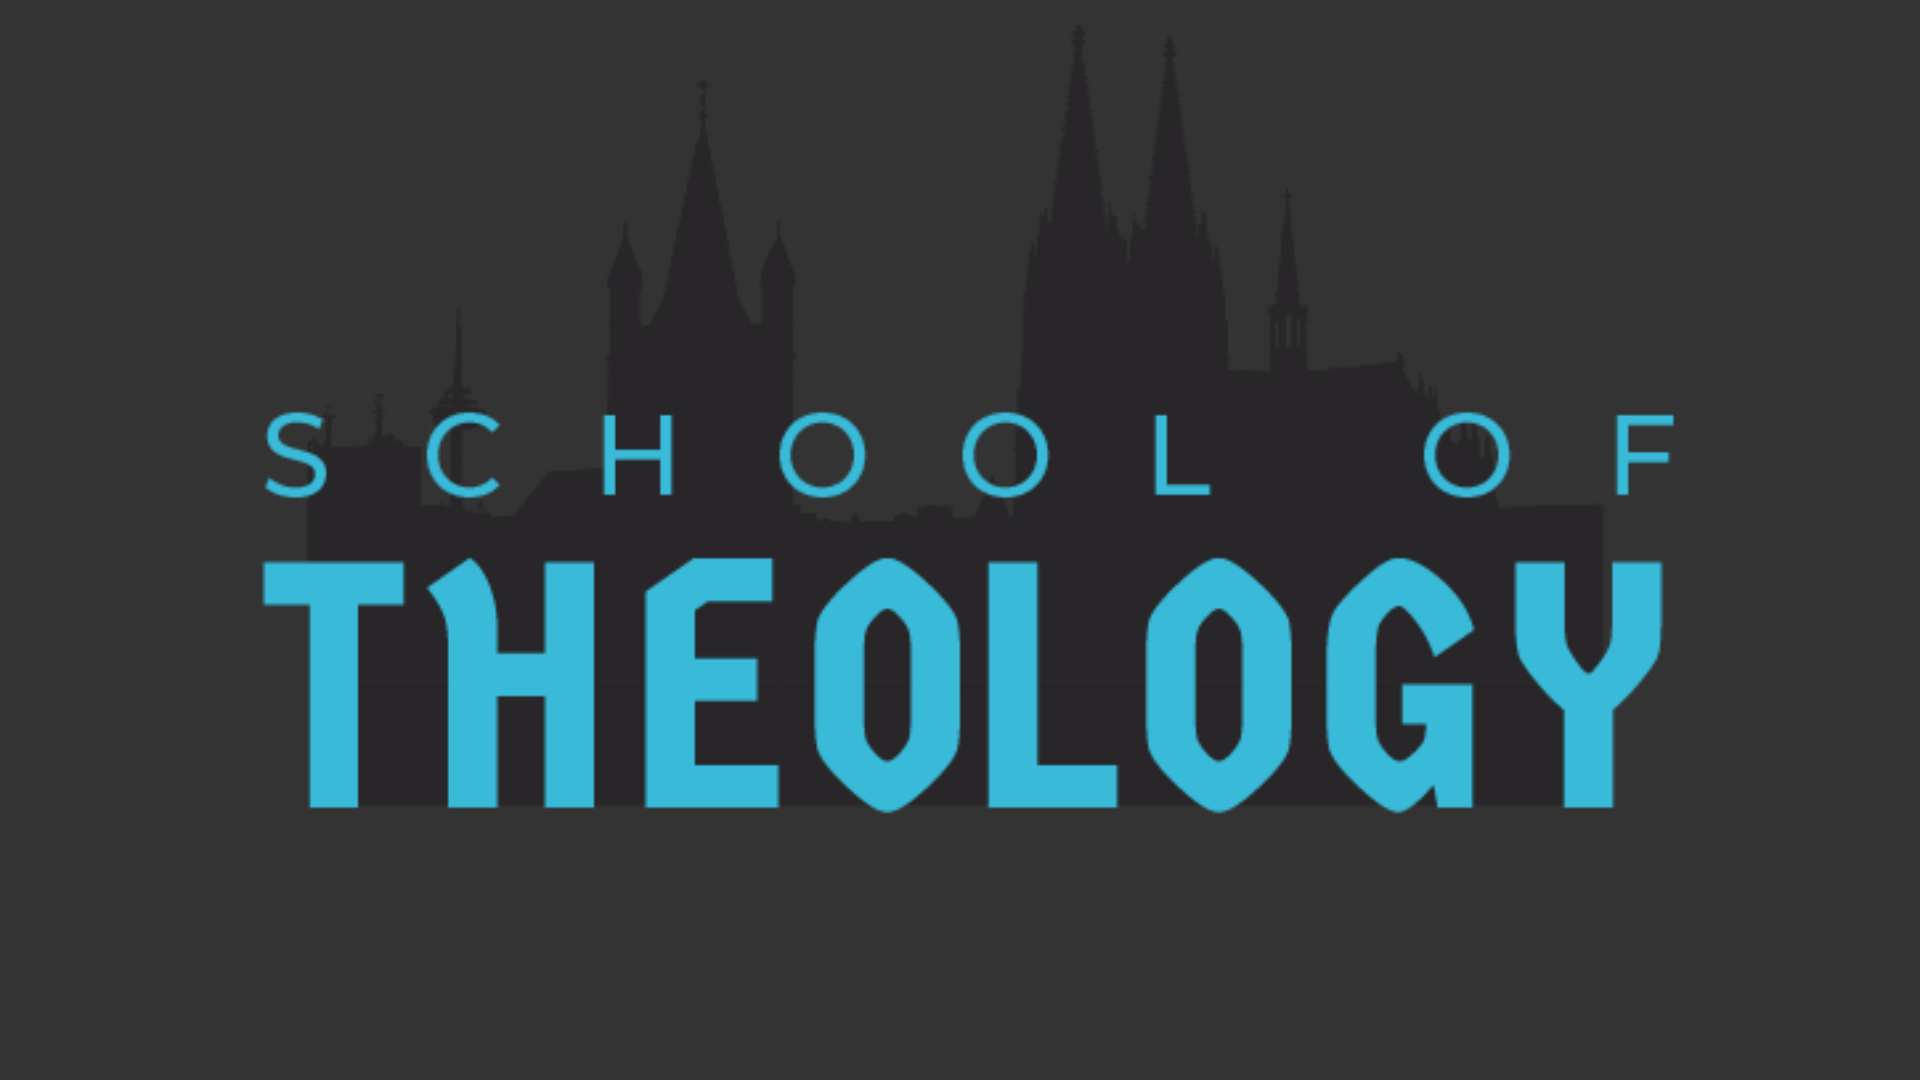 Copy of School of Theology image